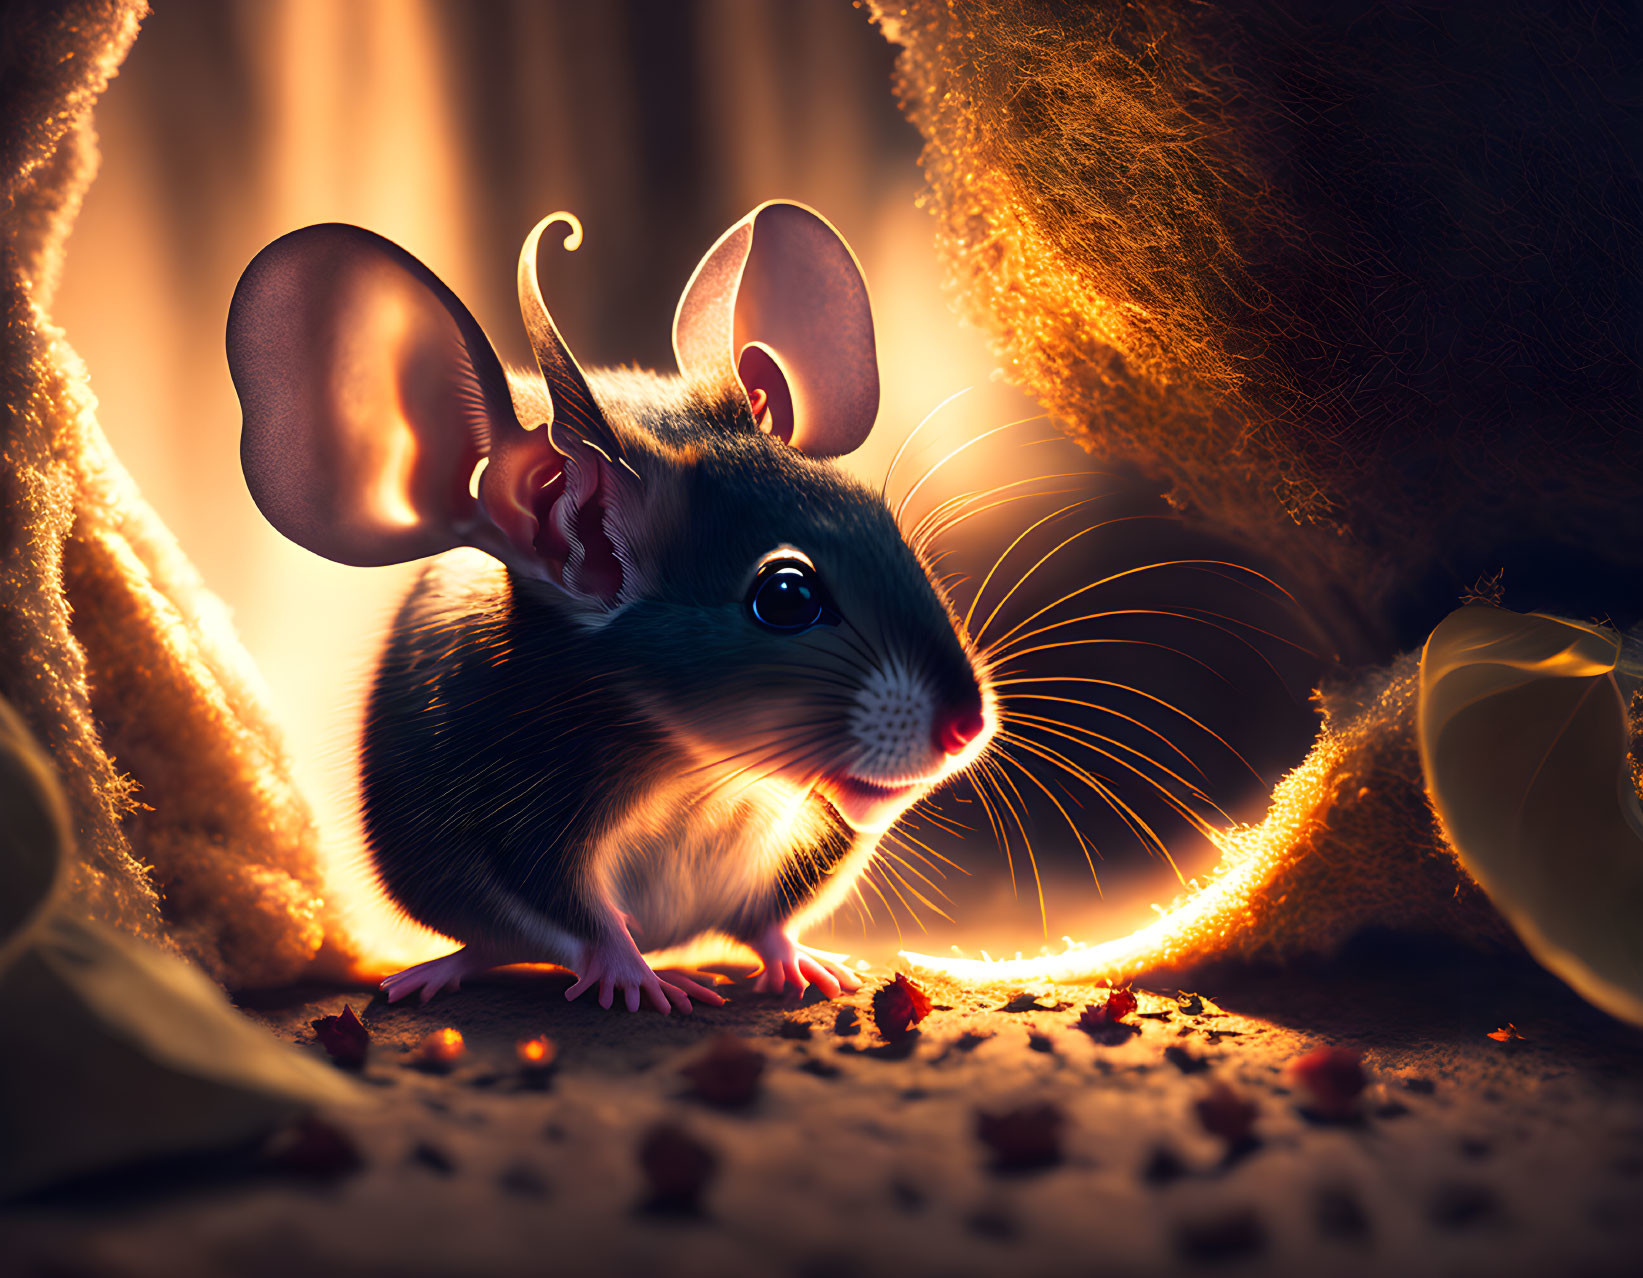 Illustration of mouse with large ears in golden light among leaves